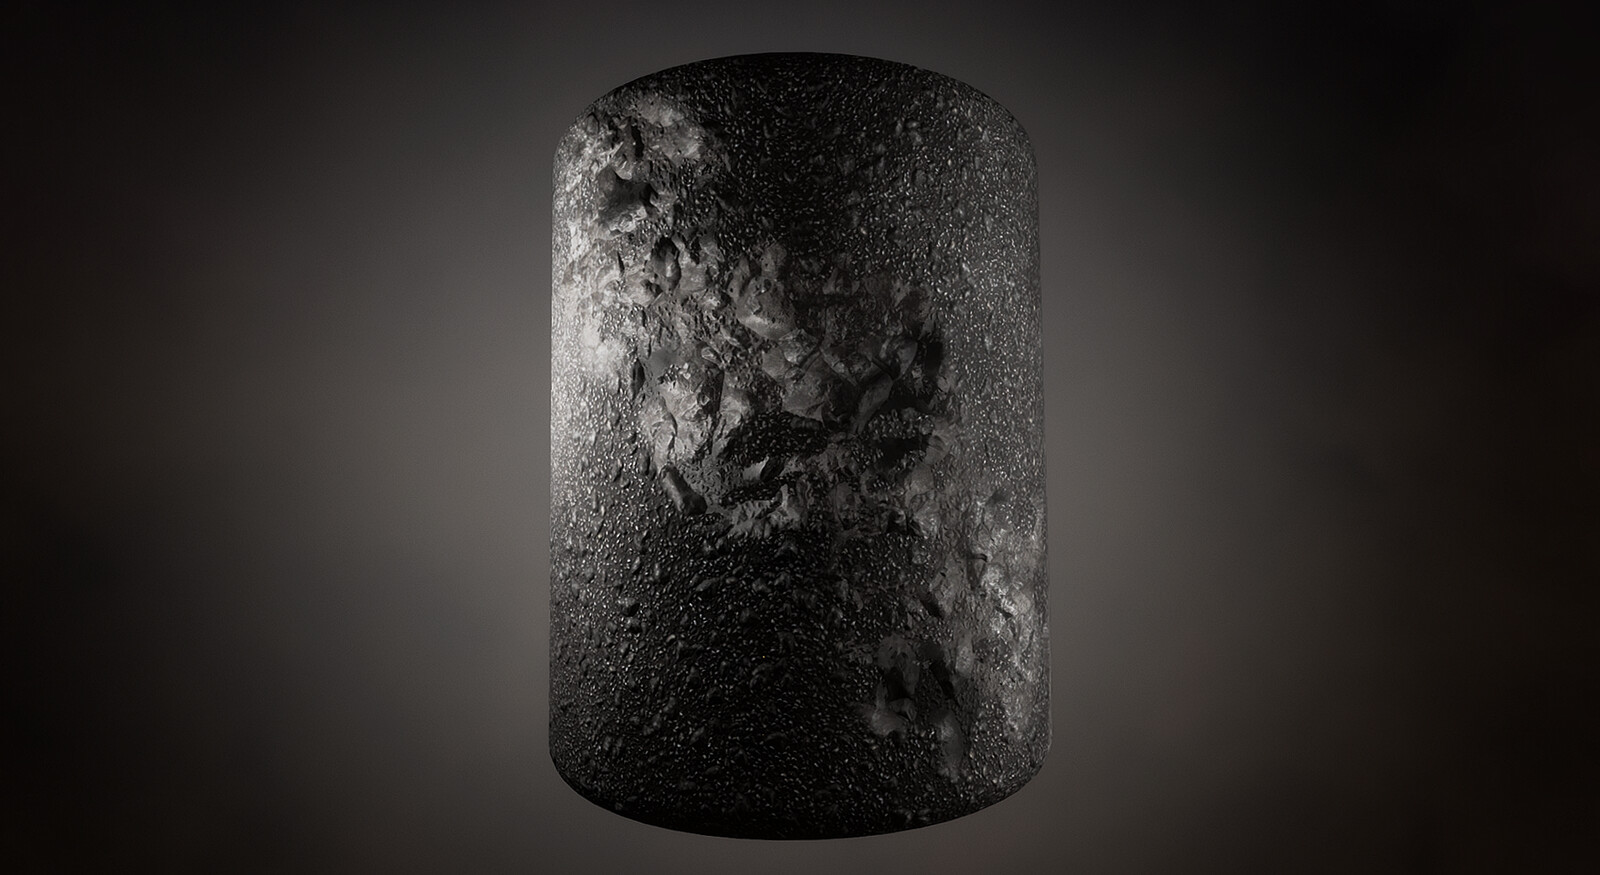 Material for Landscape - Two PBR set of textures with Shader that used Vertex Blending and Parallax Occlusion for more shape. Made With Substance Painter and Unreal Material Editor